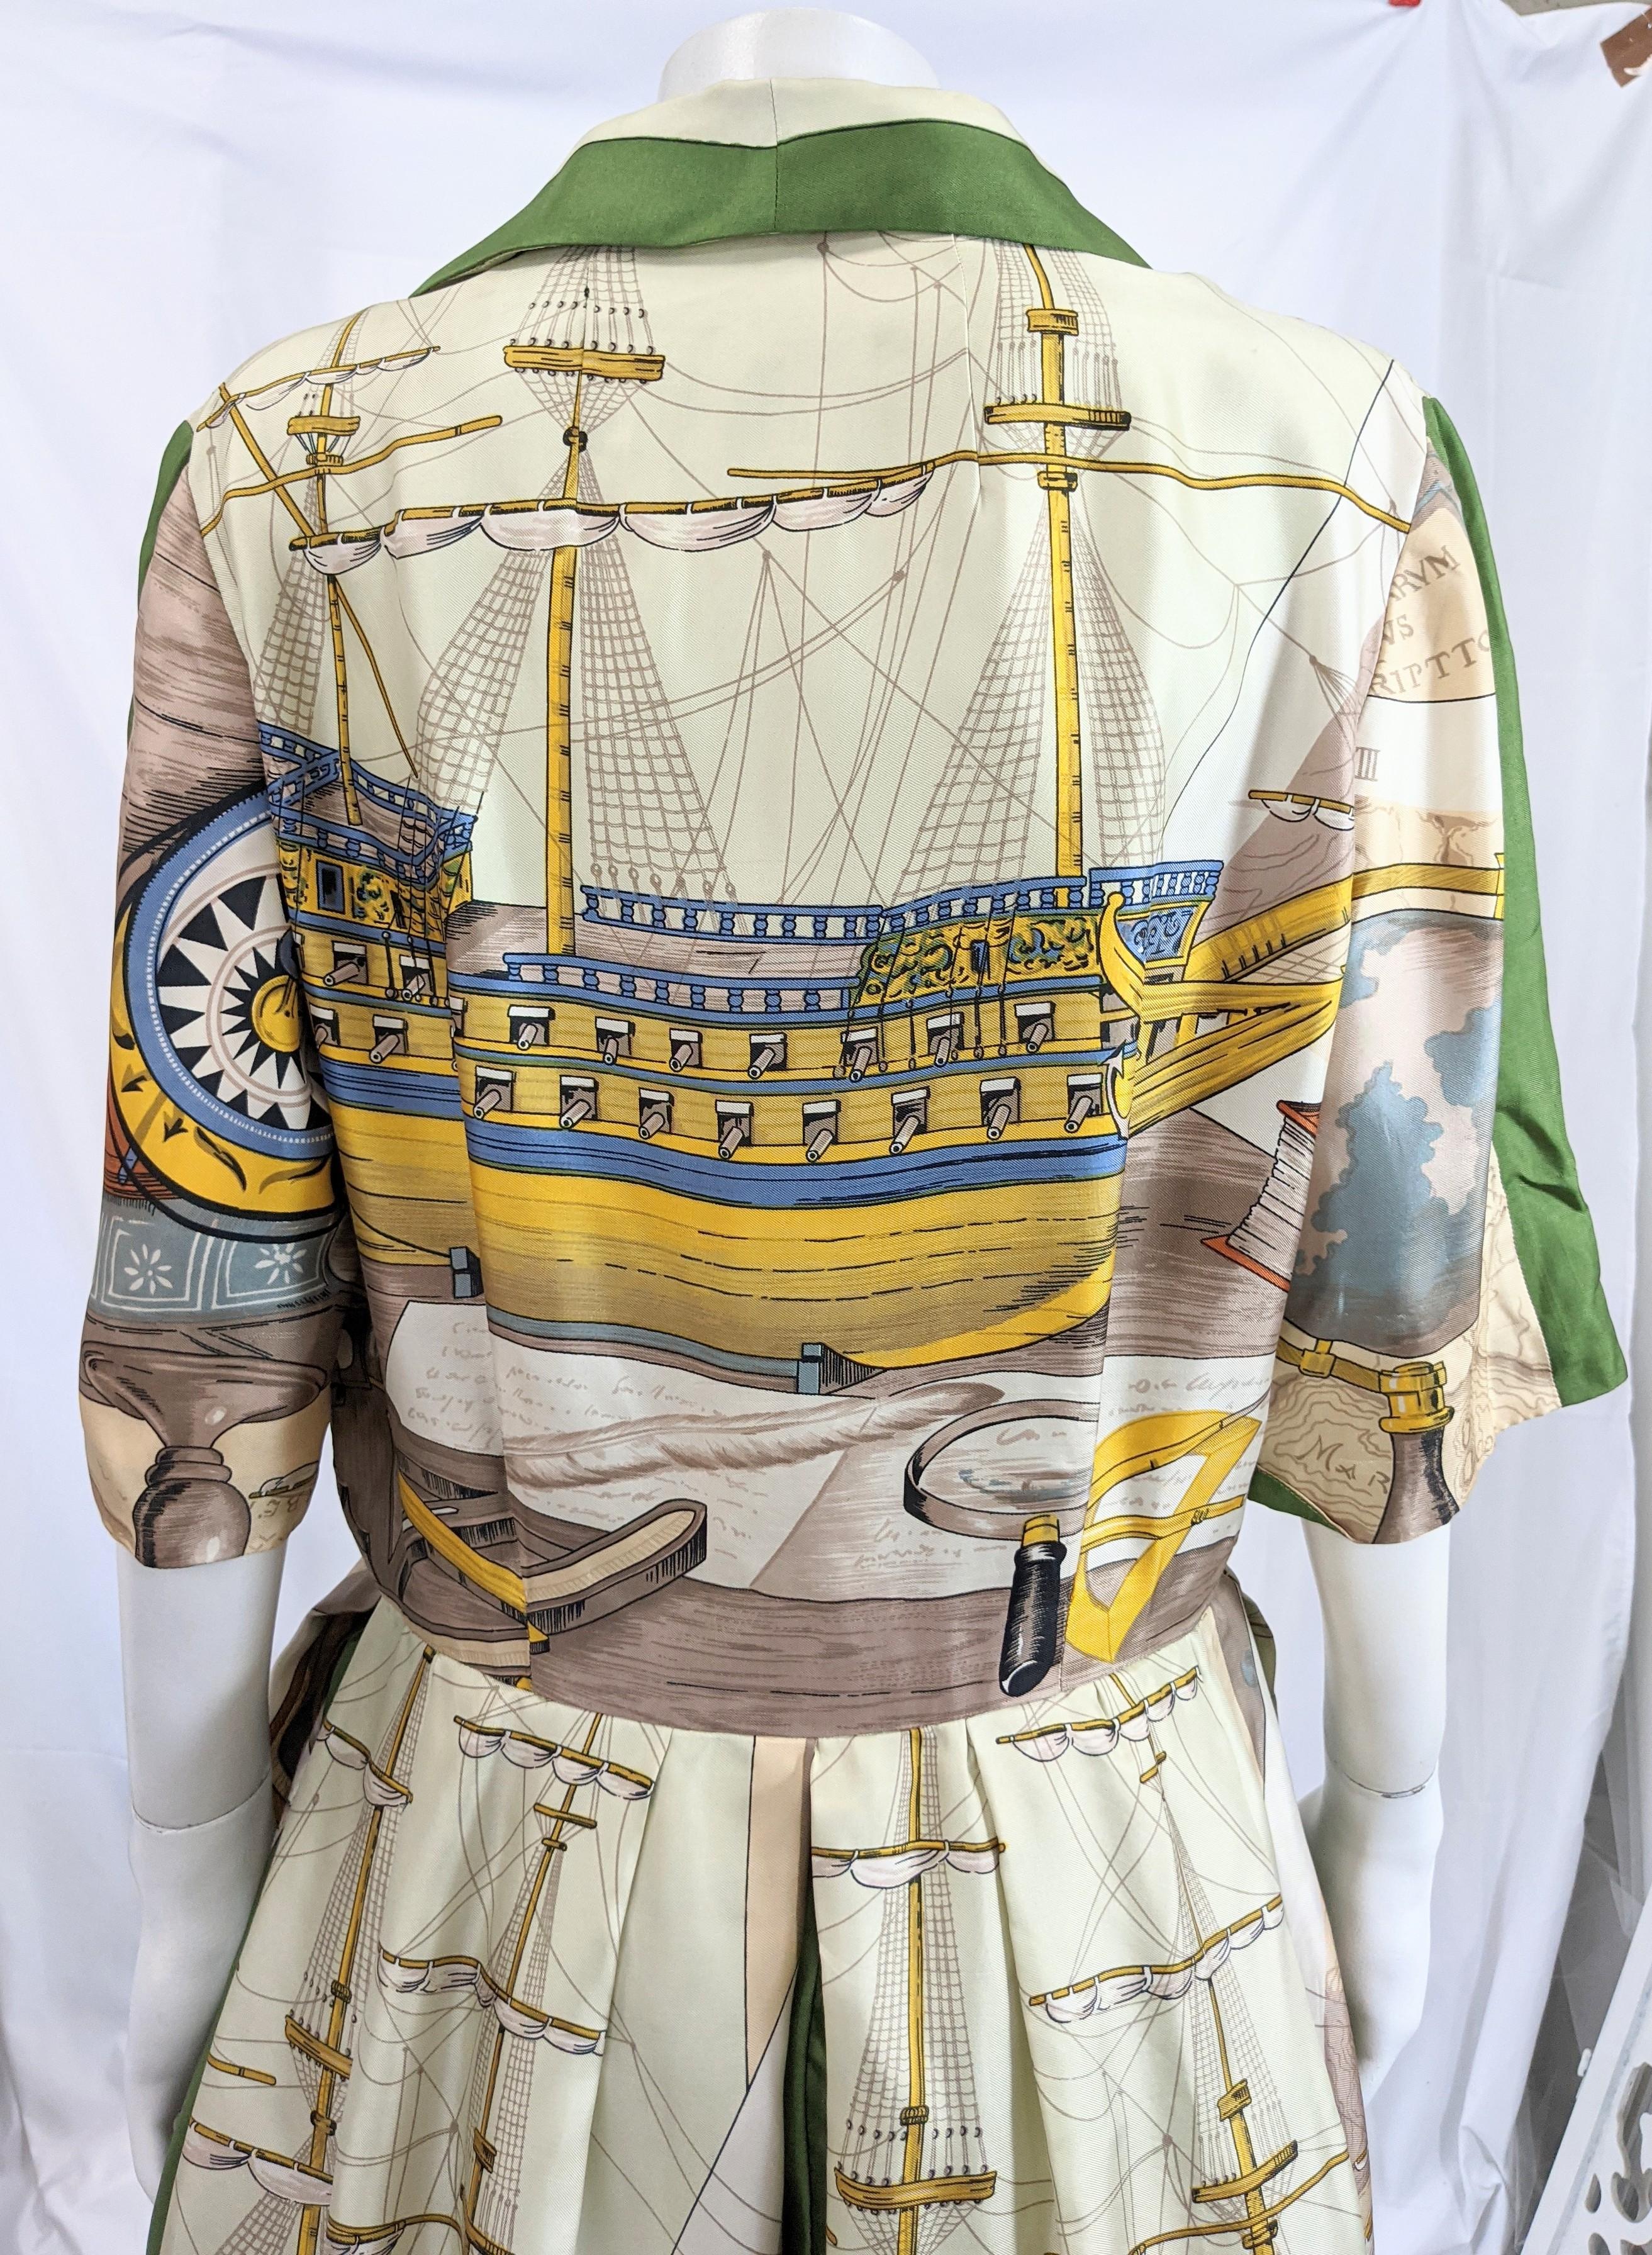 Hermes Style Printed Shirtwaist Dress by Holly Hoelscher In Good Condition For Sale In New York, NY